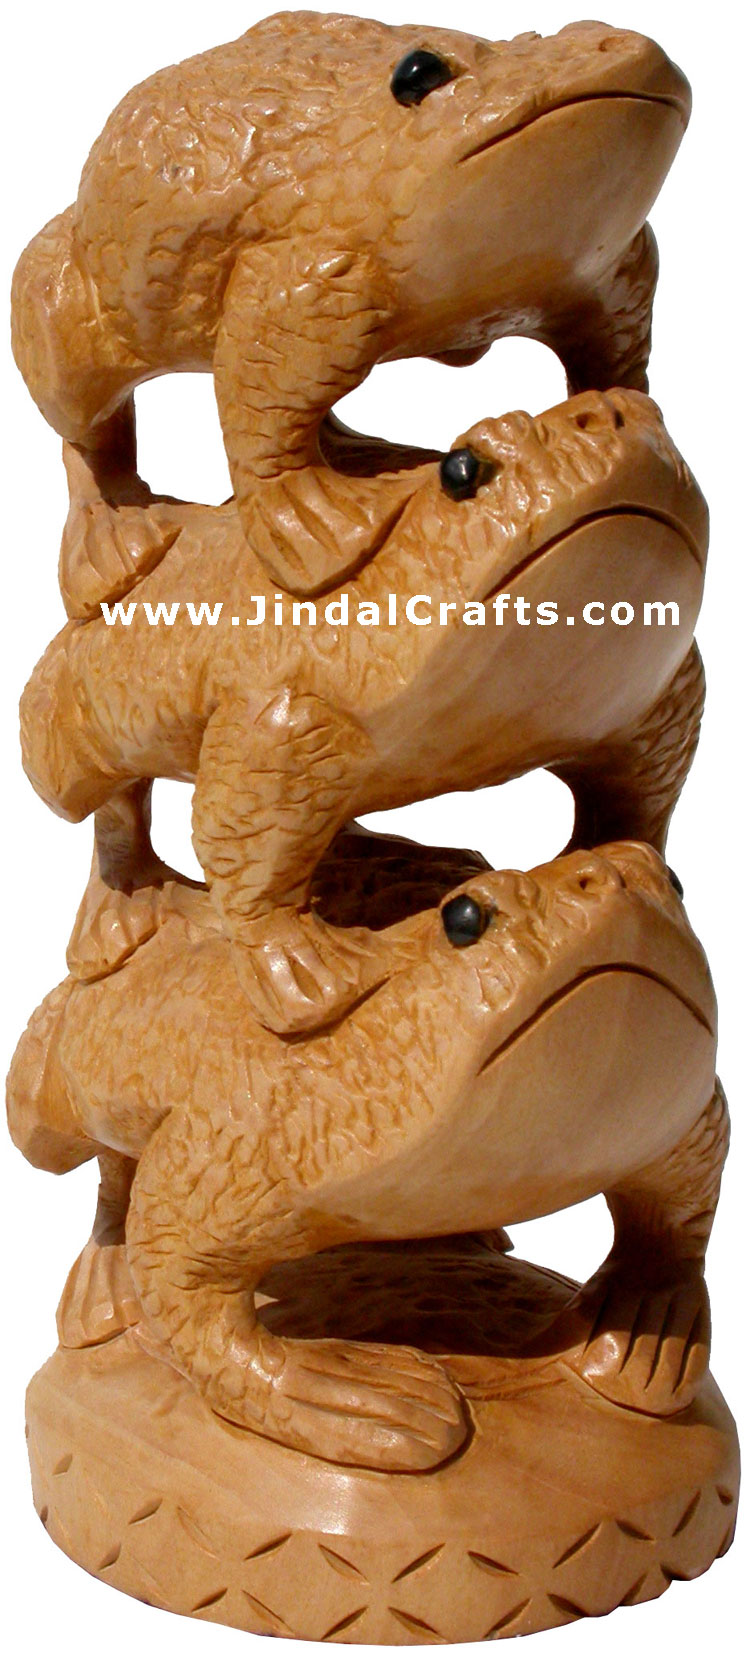 Wooden Frog Feng Shui Tower - Hand Carved Indian Artifacts Statues Lucky Idol